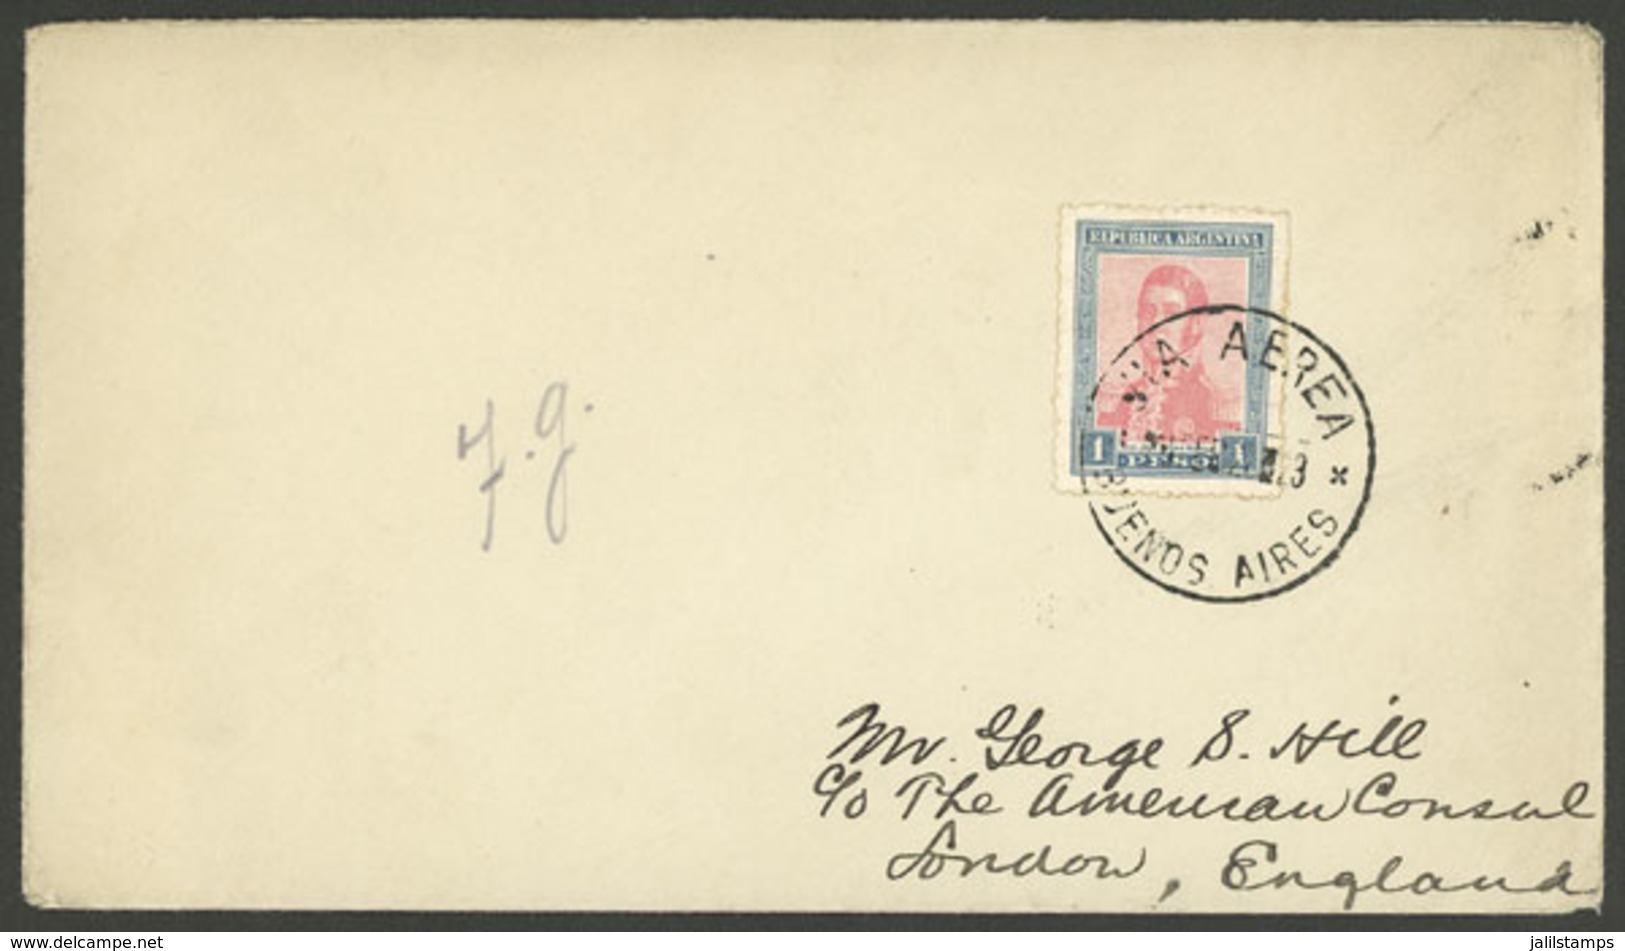 ARGENTINA: FEB/1928: Buenos Aires - London, Airmail Cover Franked With $1 San Martin, With Arrival Backstamps, VF Qualit - Brieven En Documenten